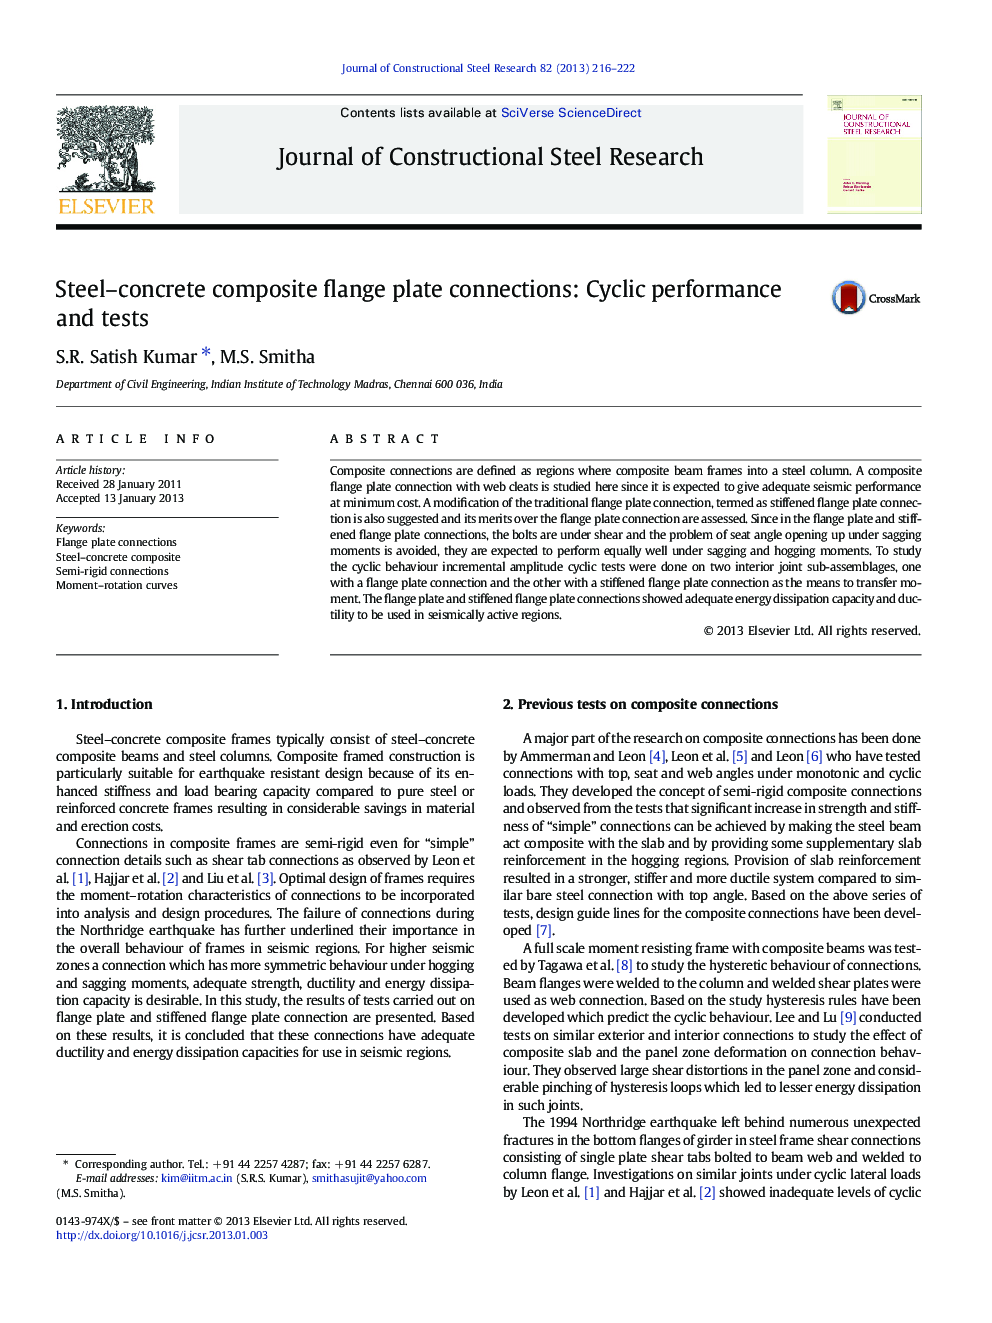 Steel–concrete composite flange plate connections: Cyclic performance and tests